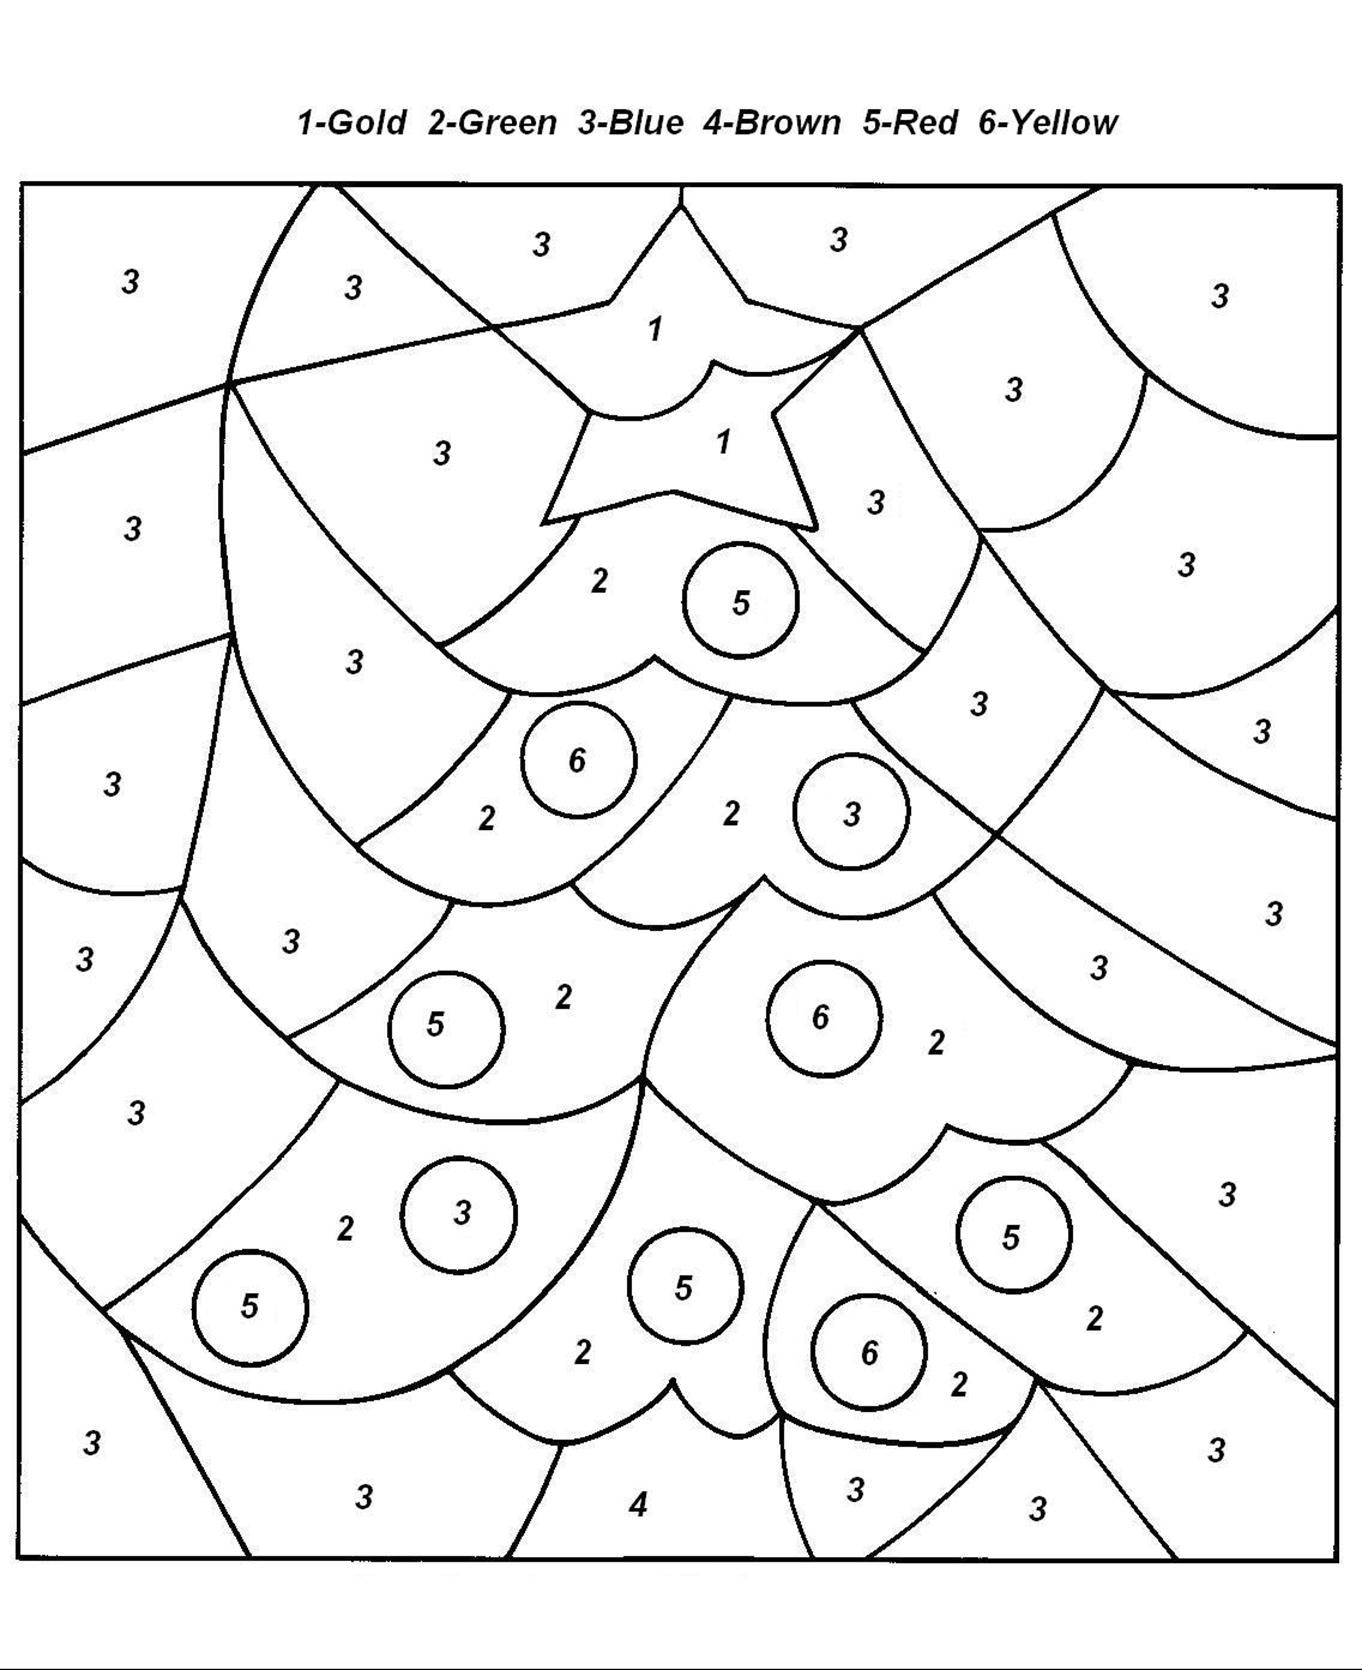 Christmas Coloring Page Print - Coloring Pages For All Ages